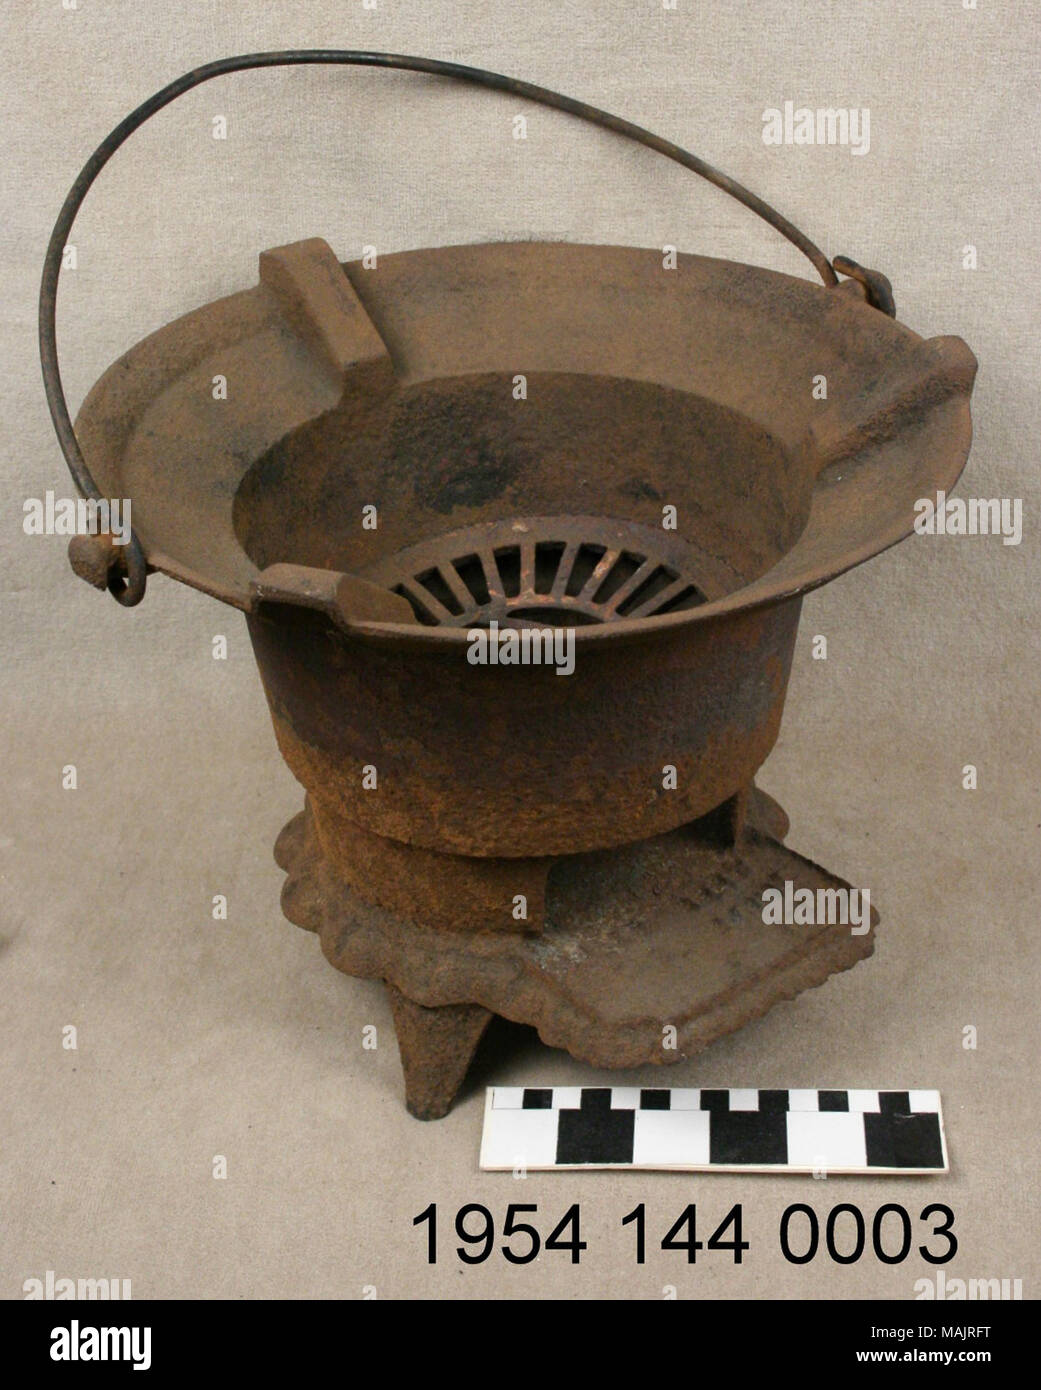 Cast iron charcoal brazier with bail handle manufactured by G.F. Filley. Title: Iron Charcoal Brazier Manufactured by G.F. Filley.  . circa 1851. Excelsior Stove and Manufacturing Co. Stock Photo